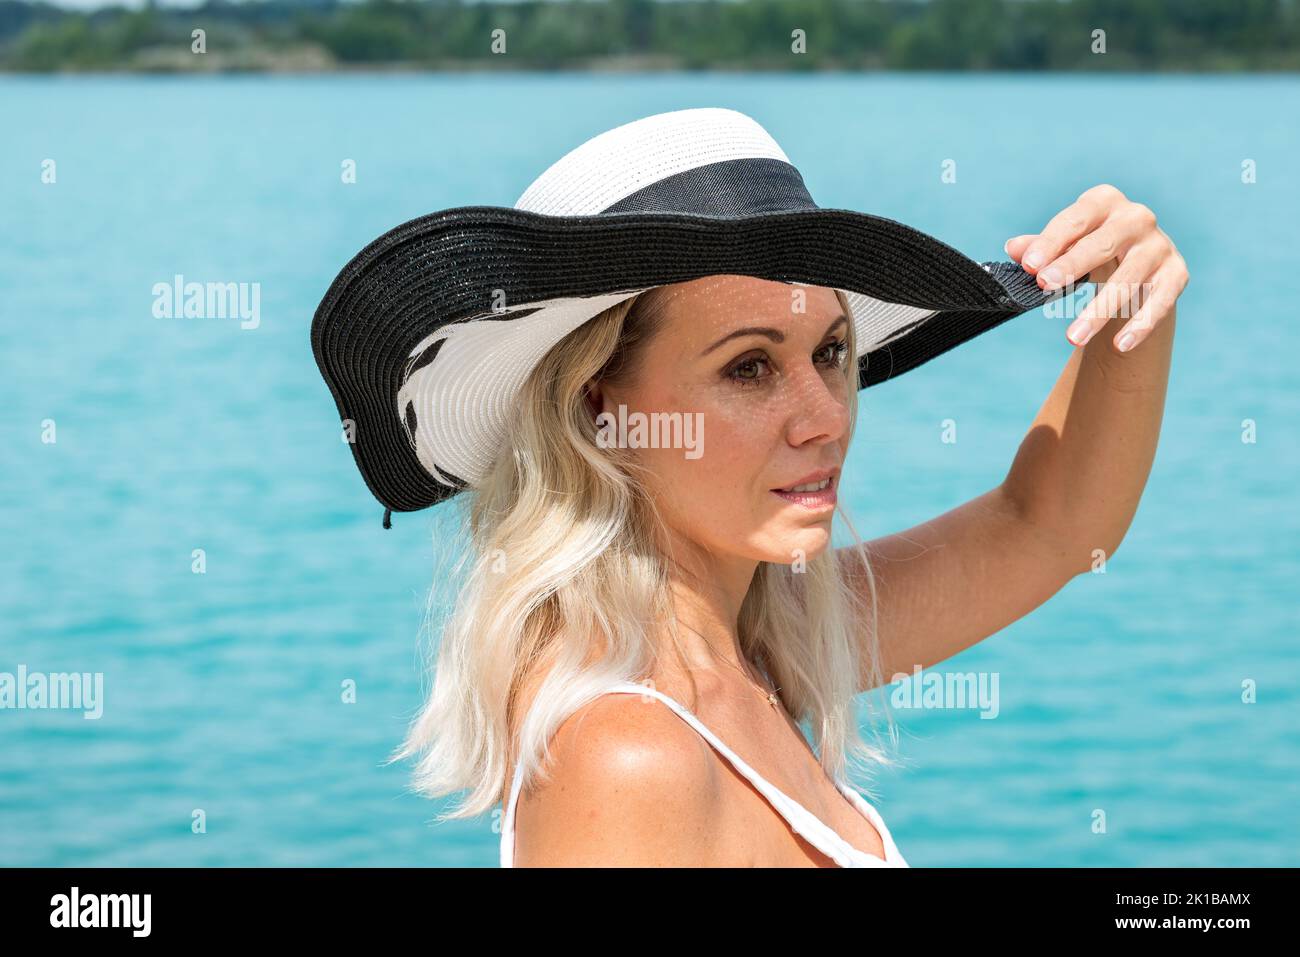 Attractive blond woman smiling friendly wearing a black and white summer hat in a white top with her hands on the hat in front of a turquoise sea look Stock Photo